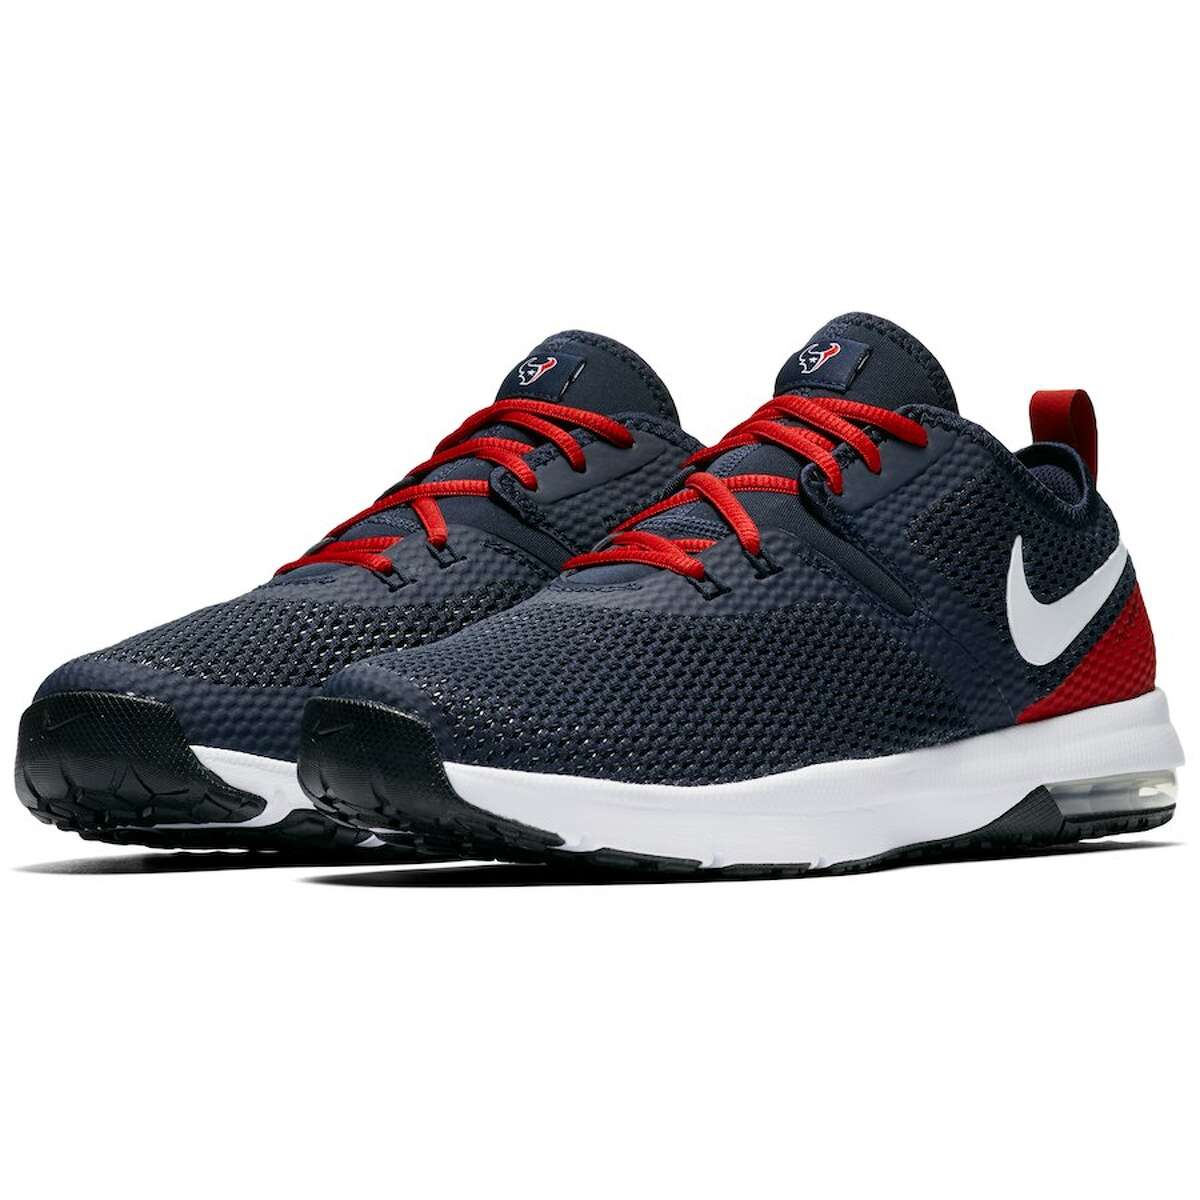 PHOTOS: A closer look at the Texans' Air Max as well as the other NFL teams The Houston Texans version of the Air Max Typha 2 collection. Take a look at how the other NFL teams' special Air Max look.